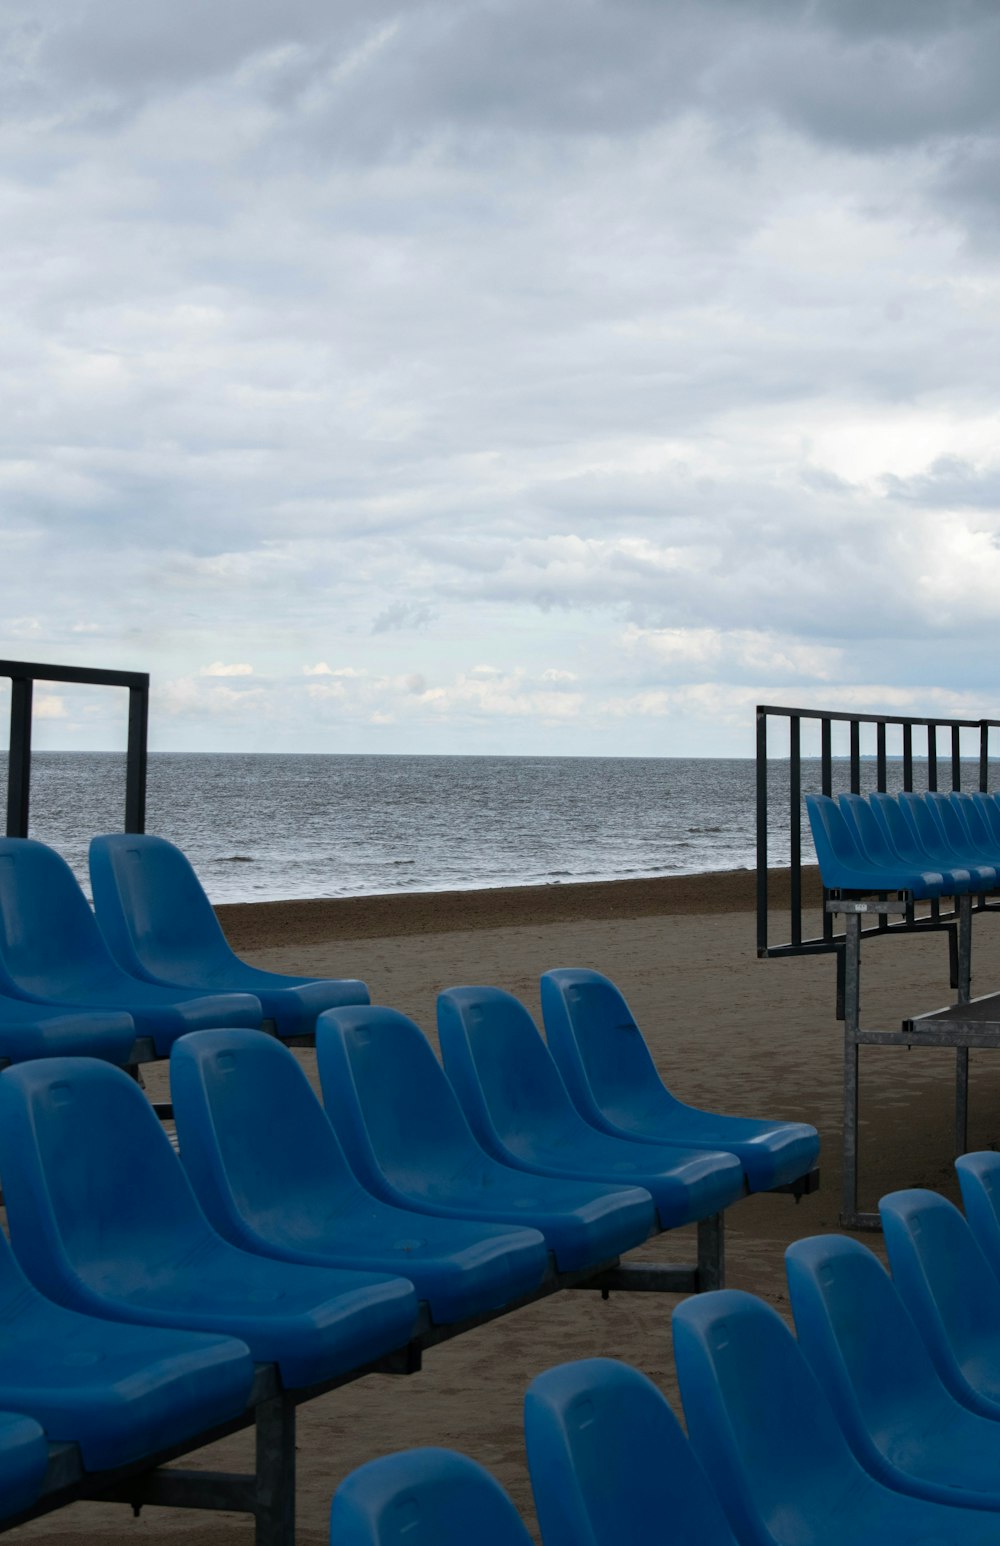 a row of blue chairs sitting on top of a sandy beach